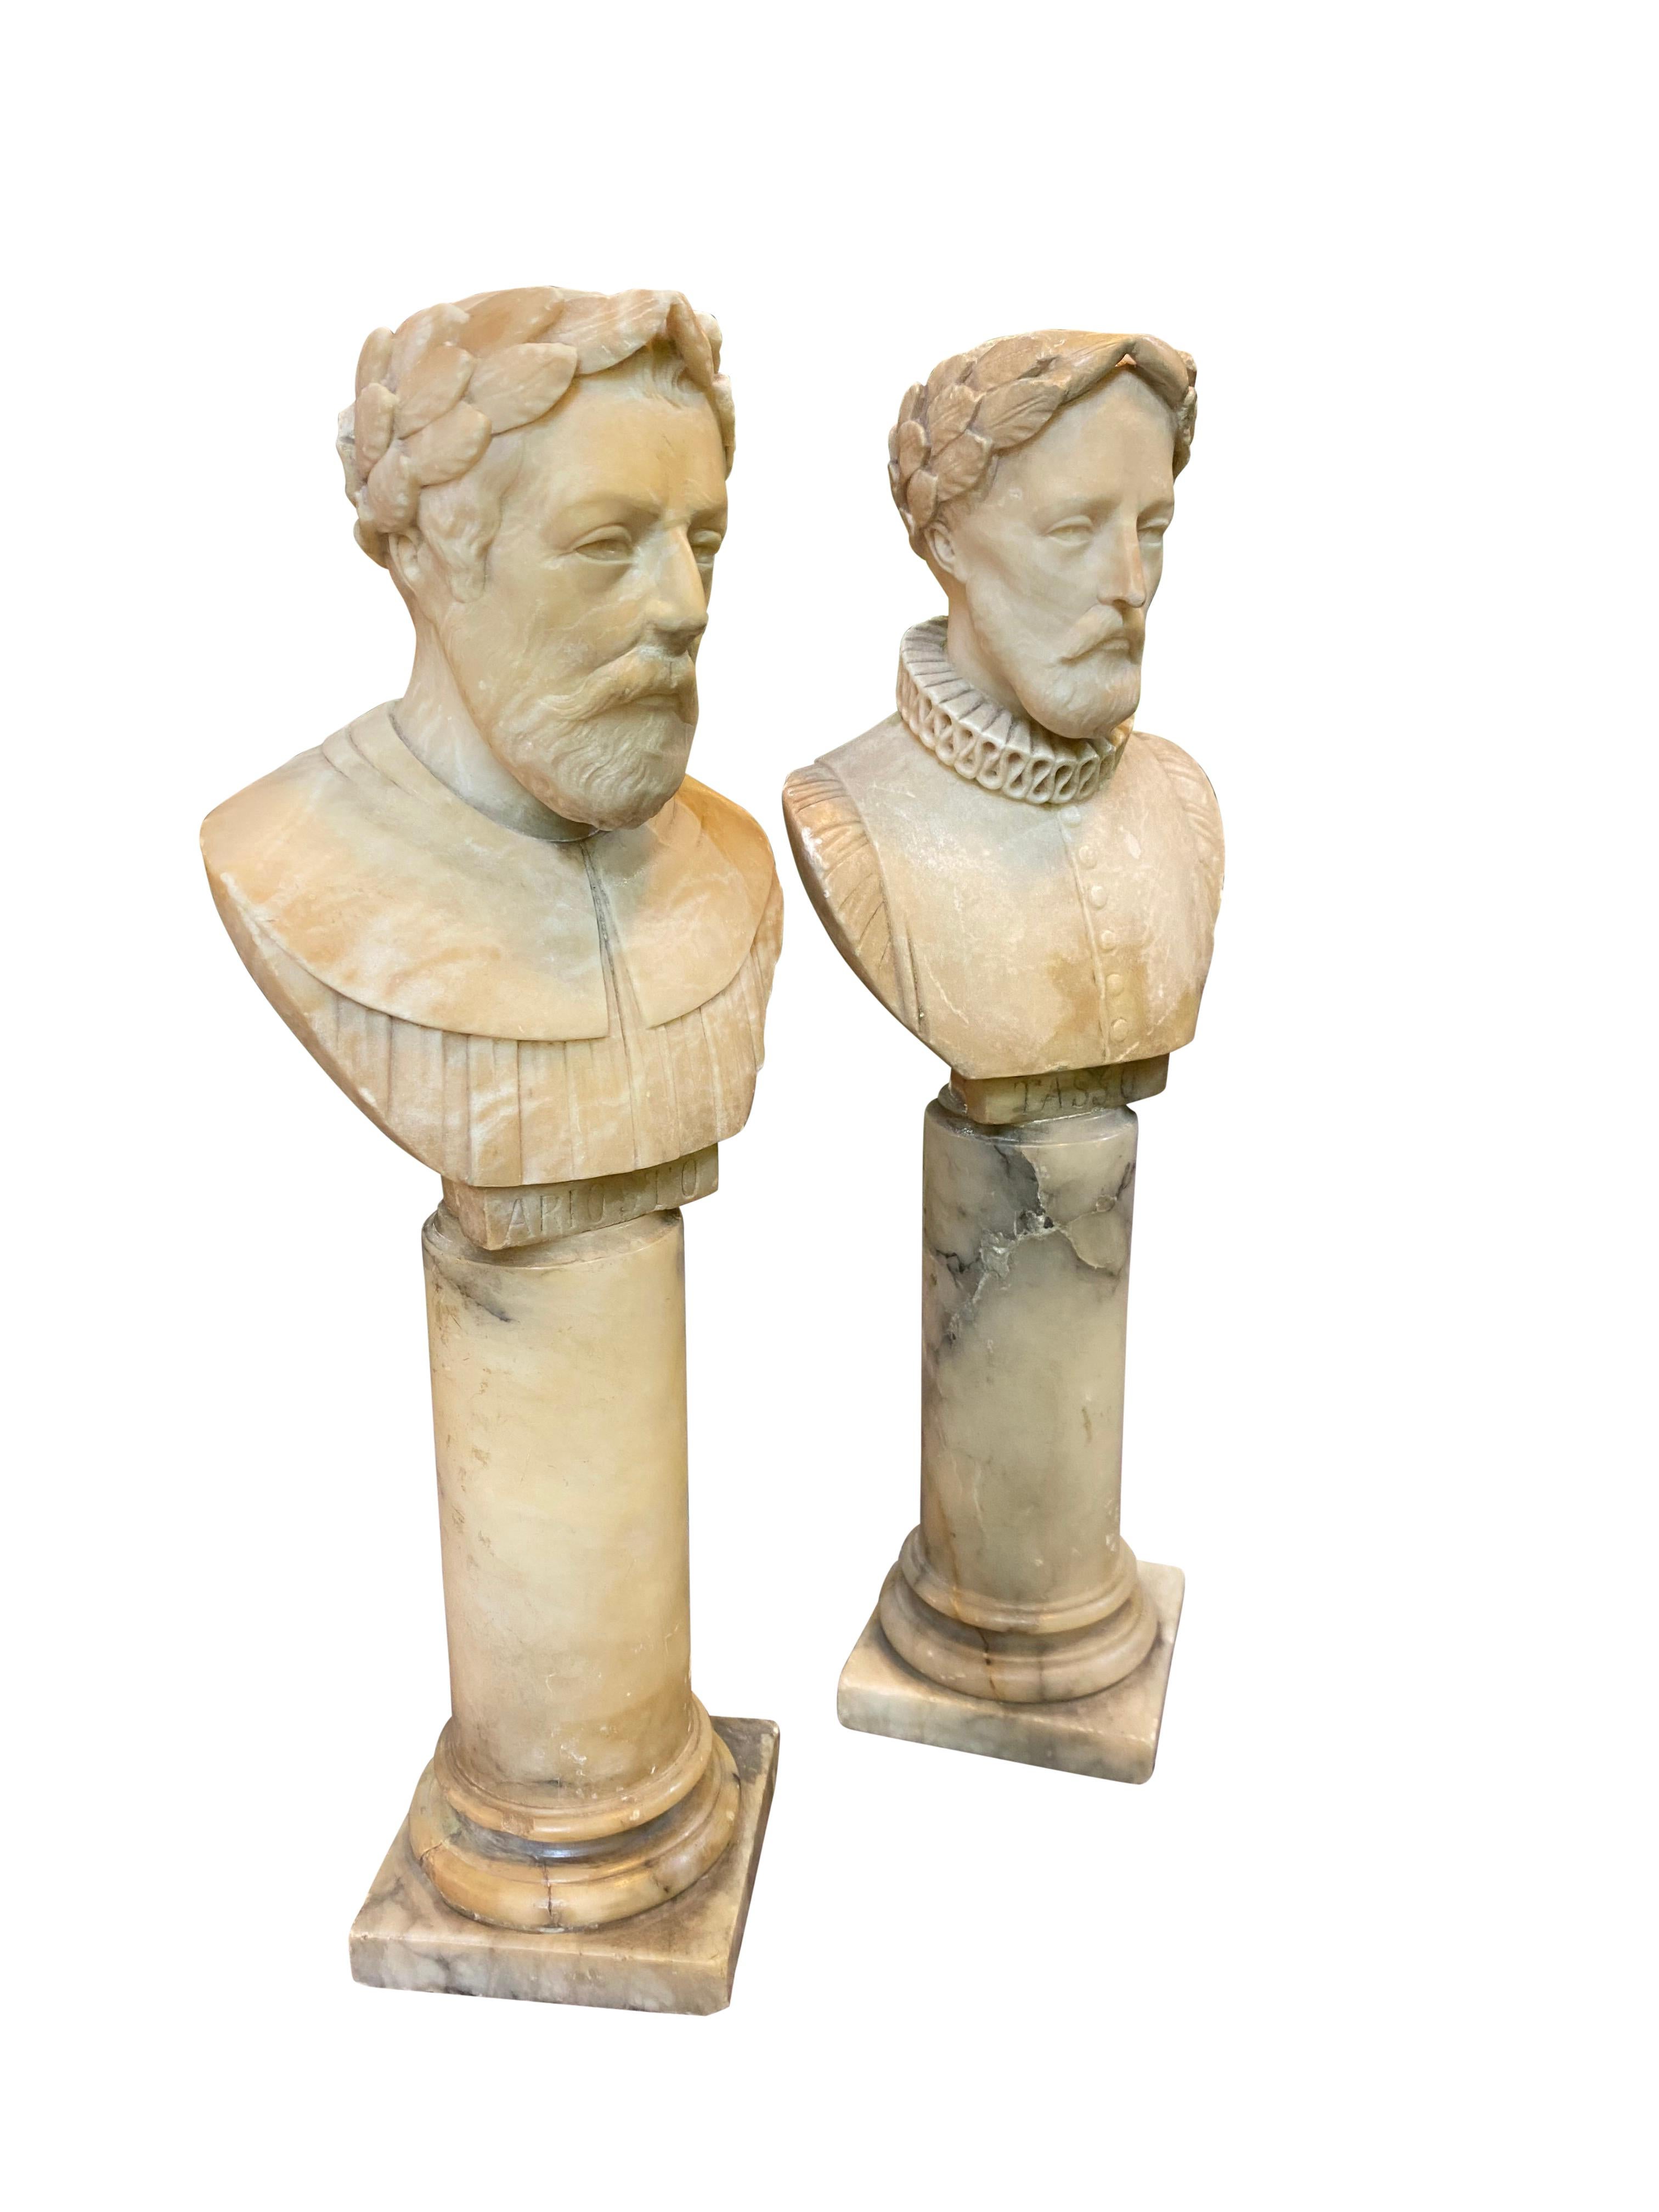 A stunning pair of 19th century alabaster hand carved busts of Ariosto and Tasso on alabaster columns, circa 1810.

Ludovico Ariosto (8th September 1474 – 6 July 1533) was an Italian poet. He is best known as the author of the romance epic Orlando